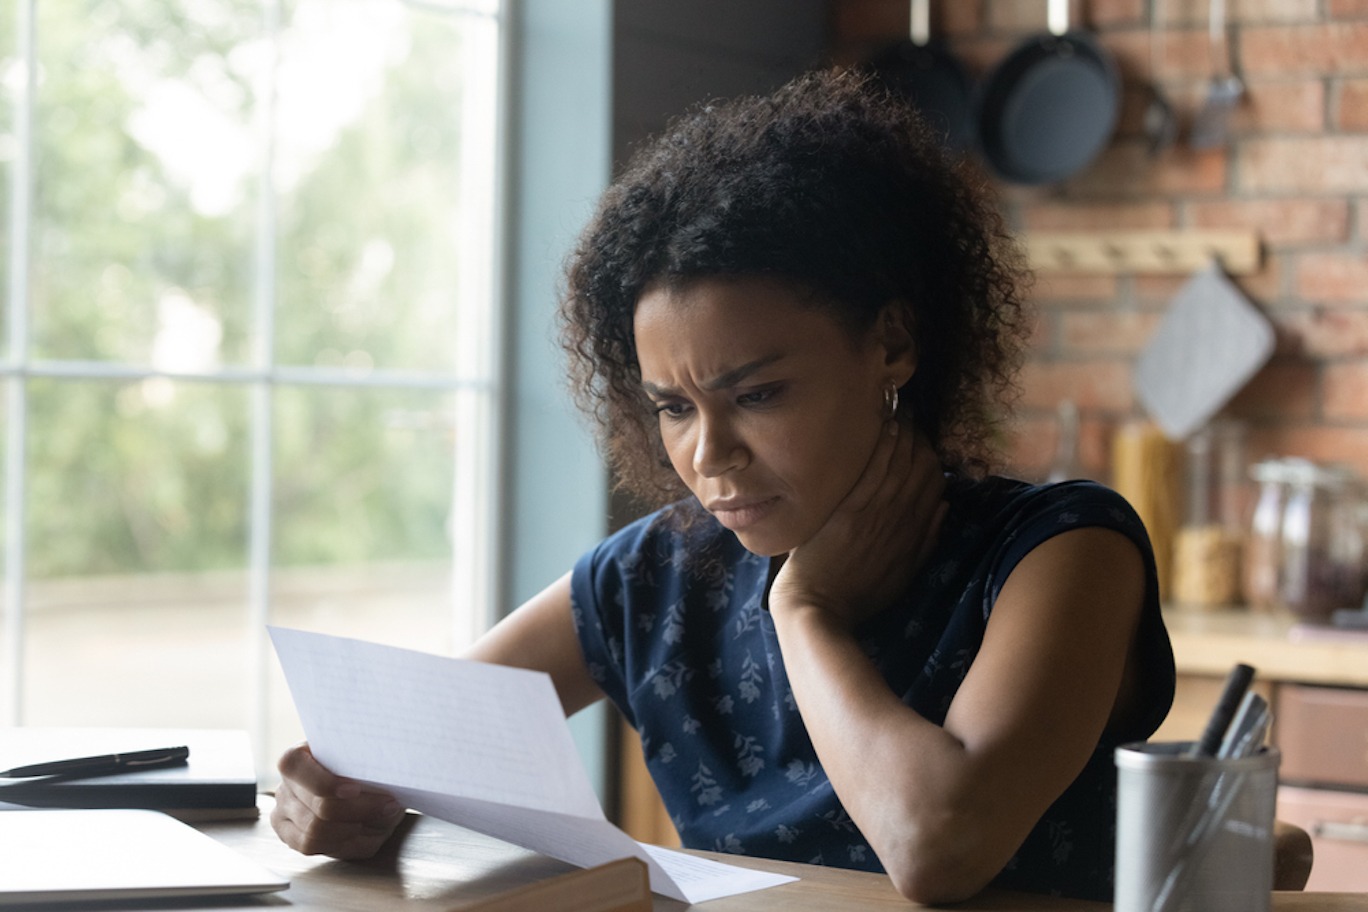 Young Black woman reading a letter with a distressed expression on her face while sitting in her kitchen.